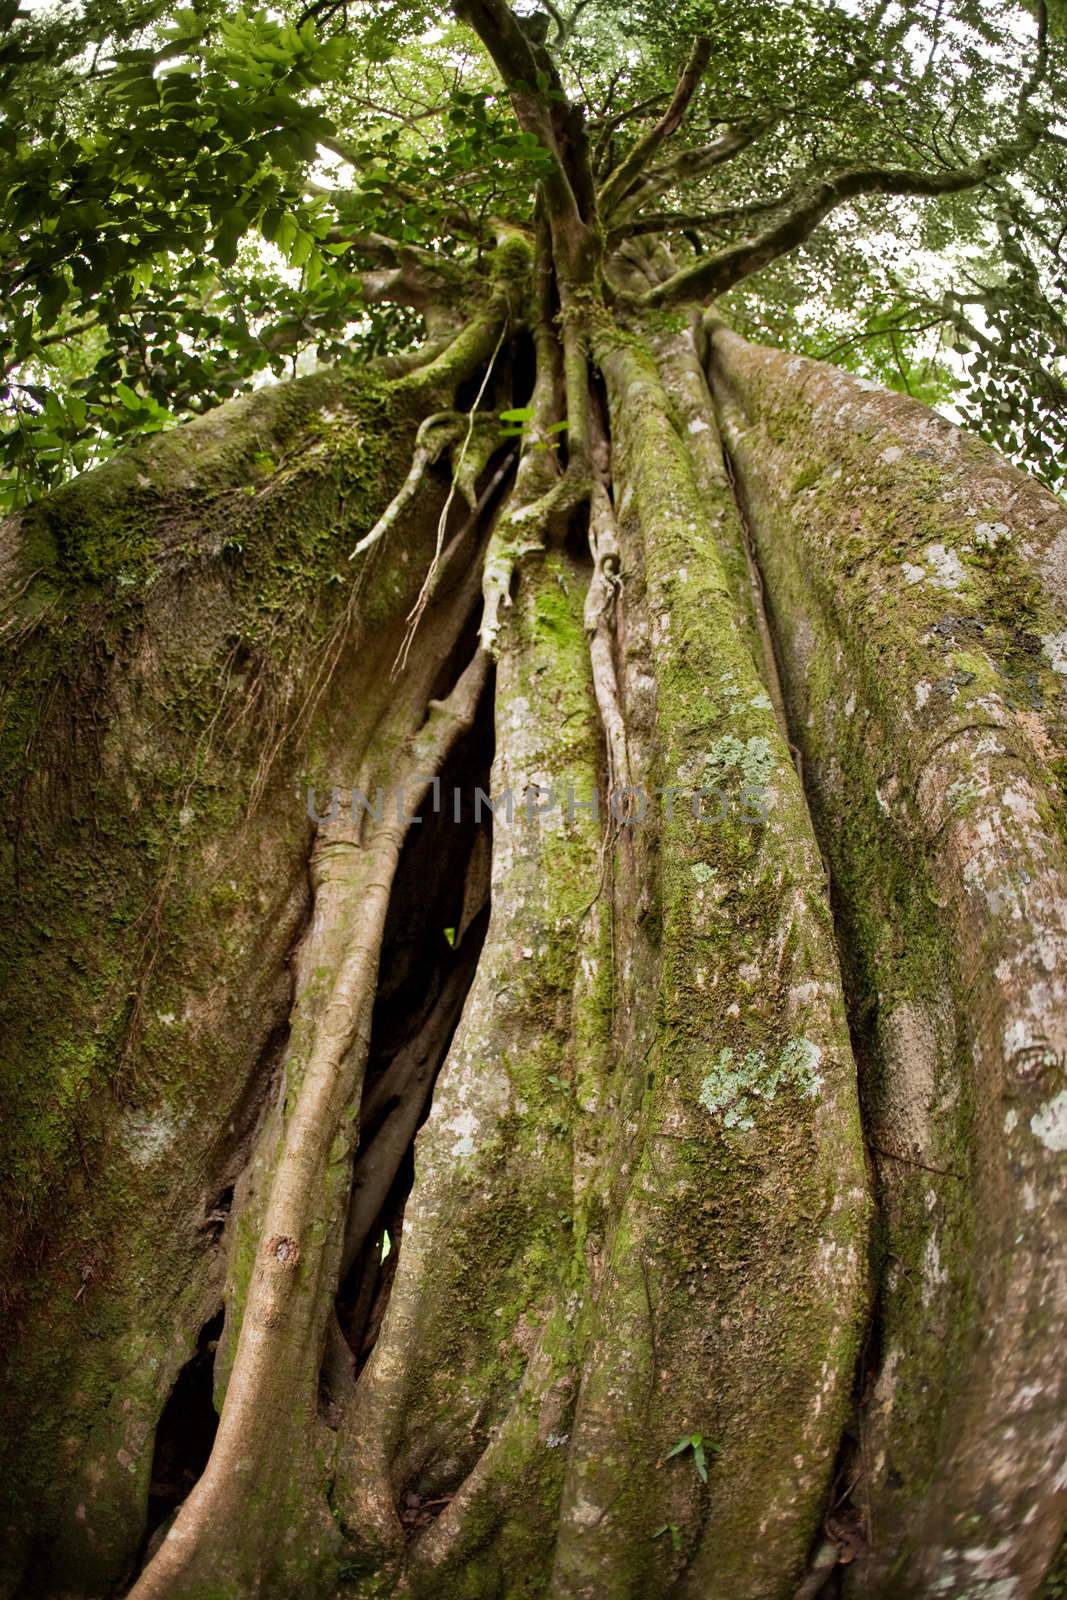 Strangler Fig Tree in Costa Rican cloud forest